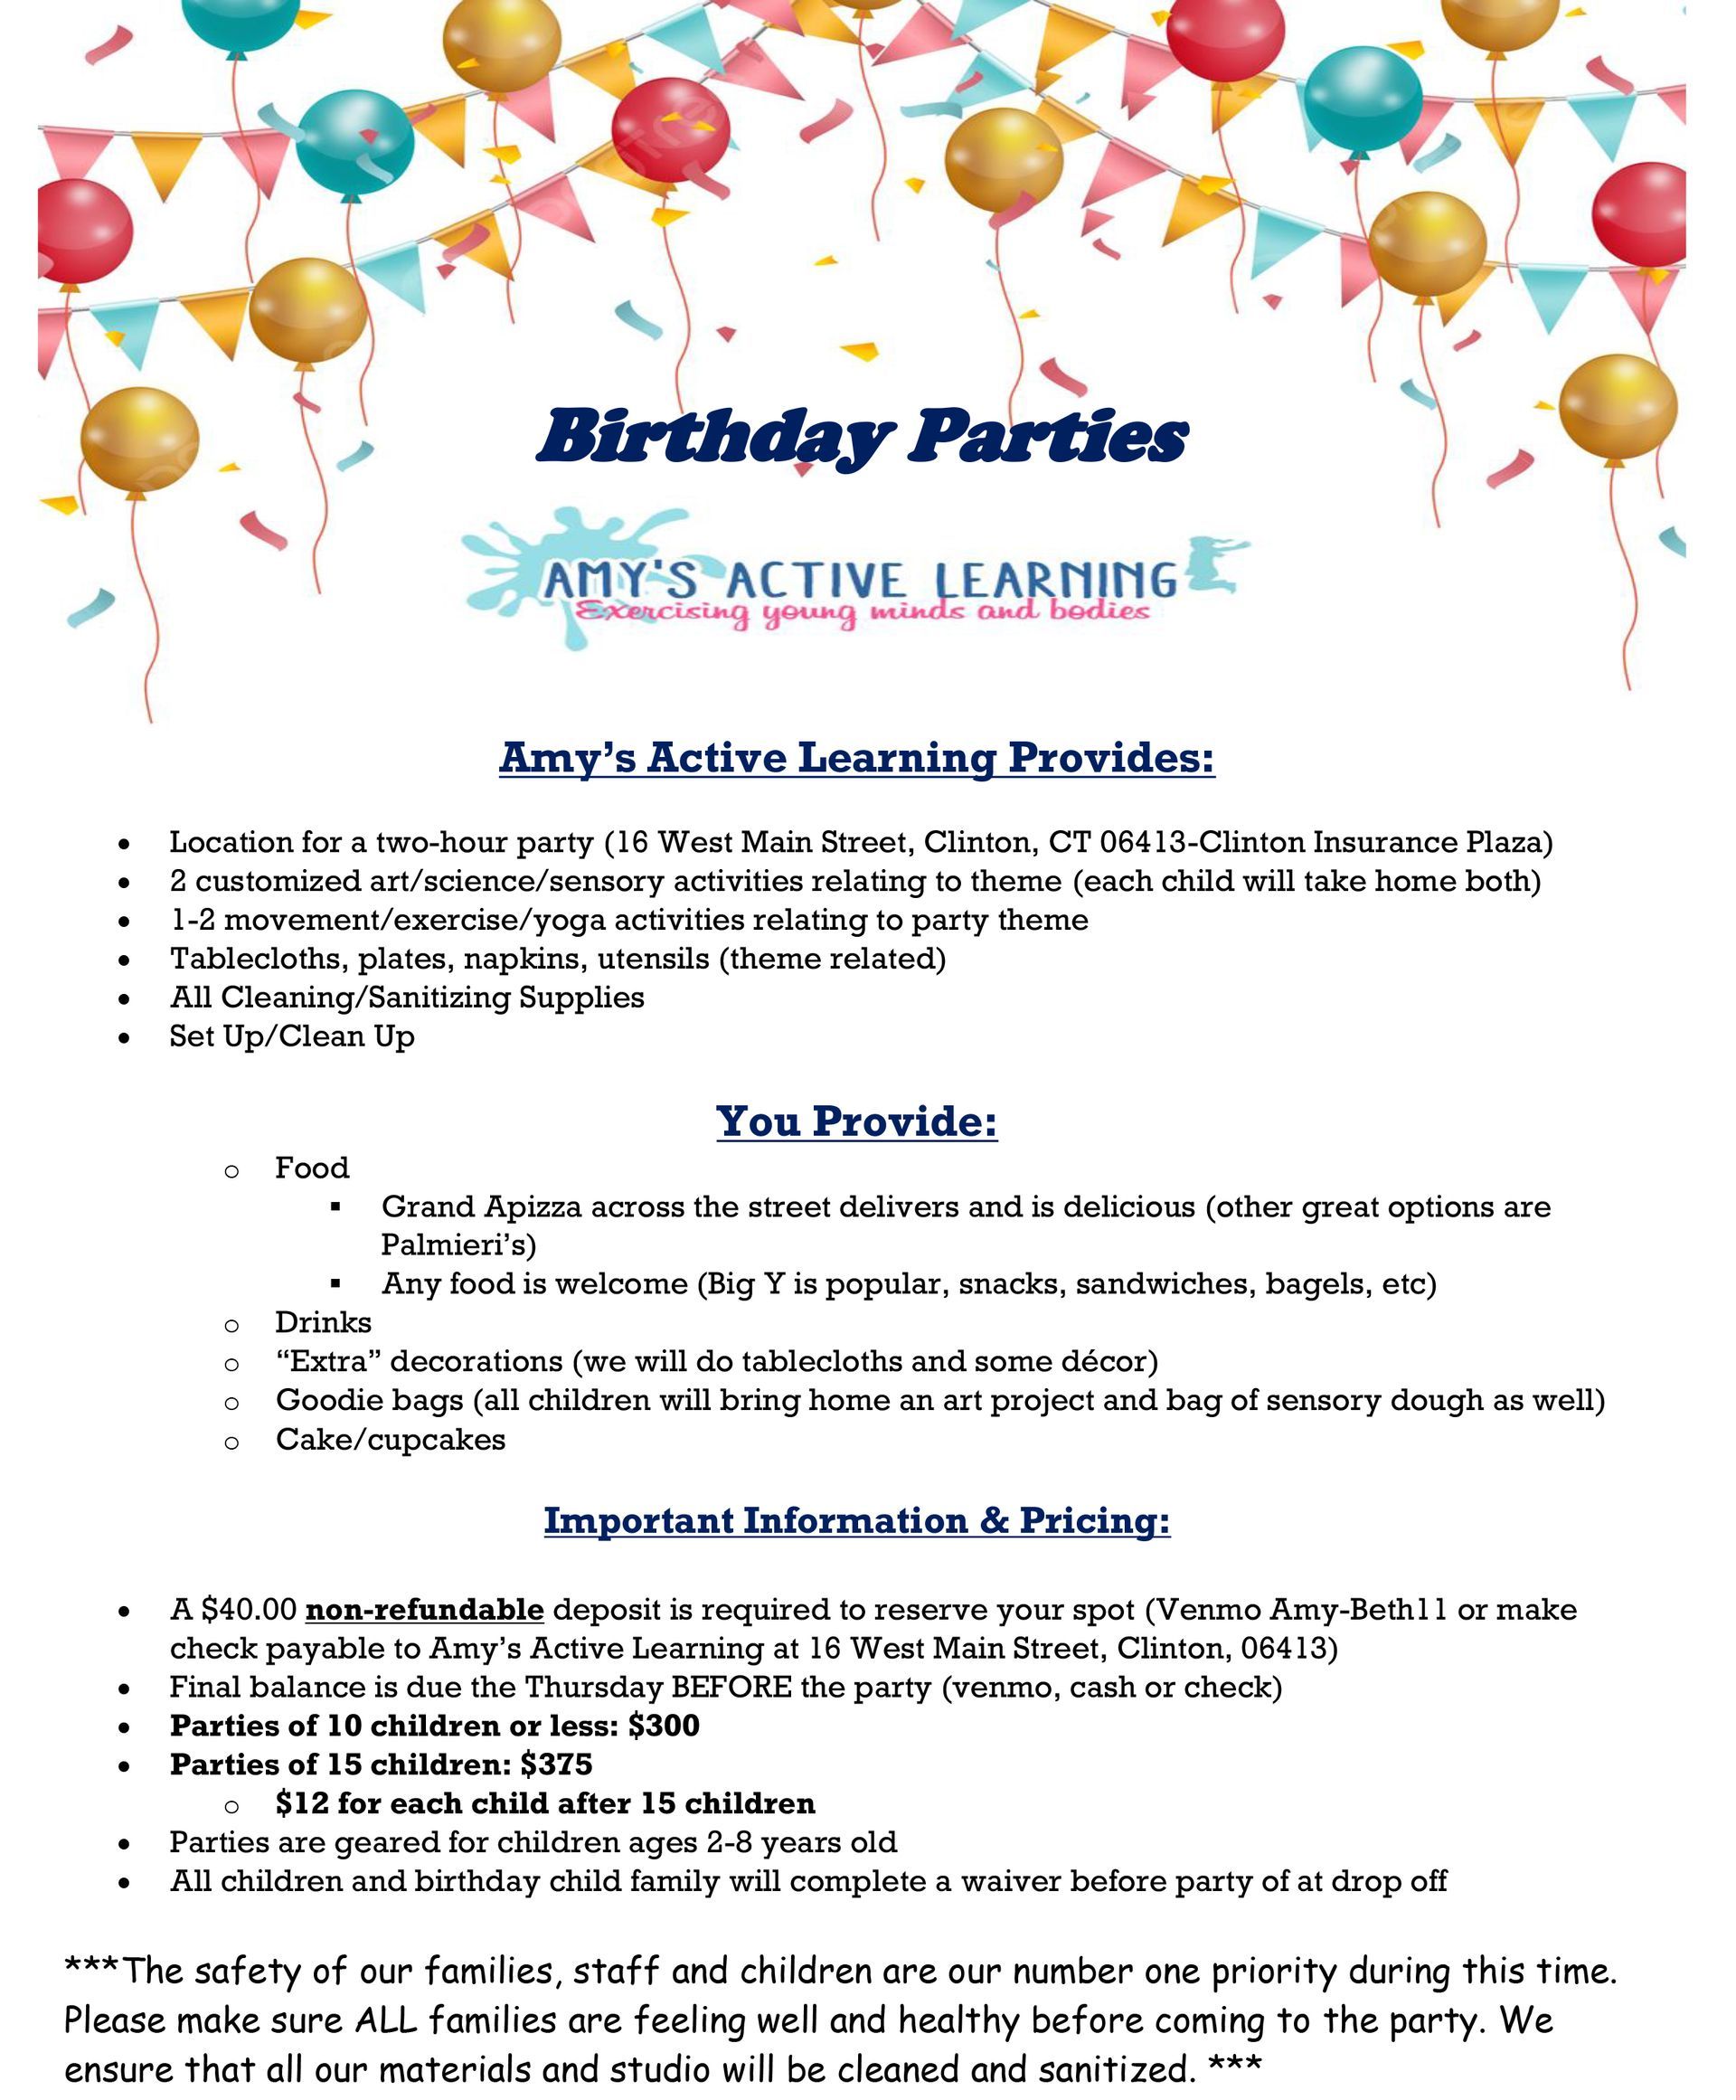 Amy’s Active Learning Birthday Party Flyer